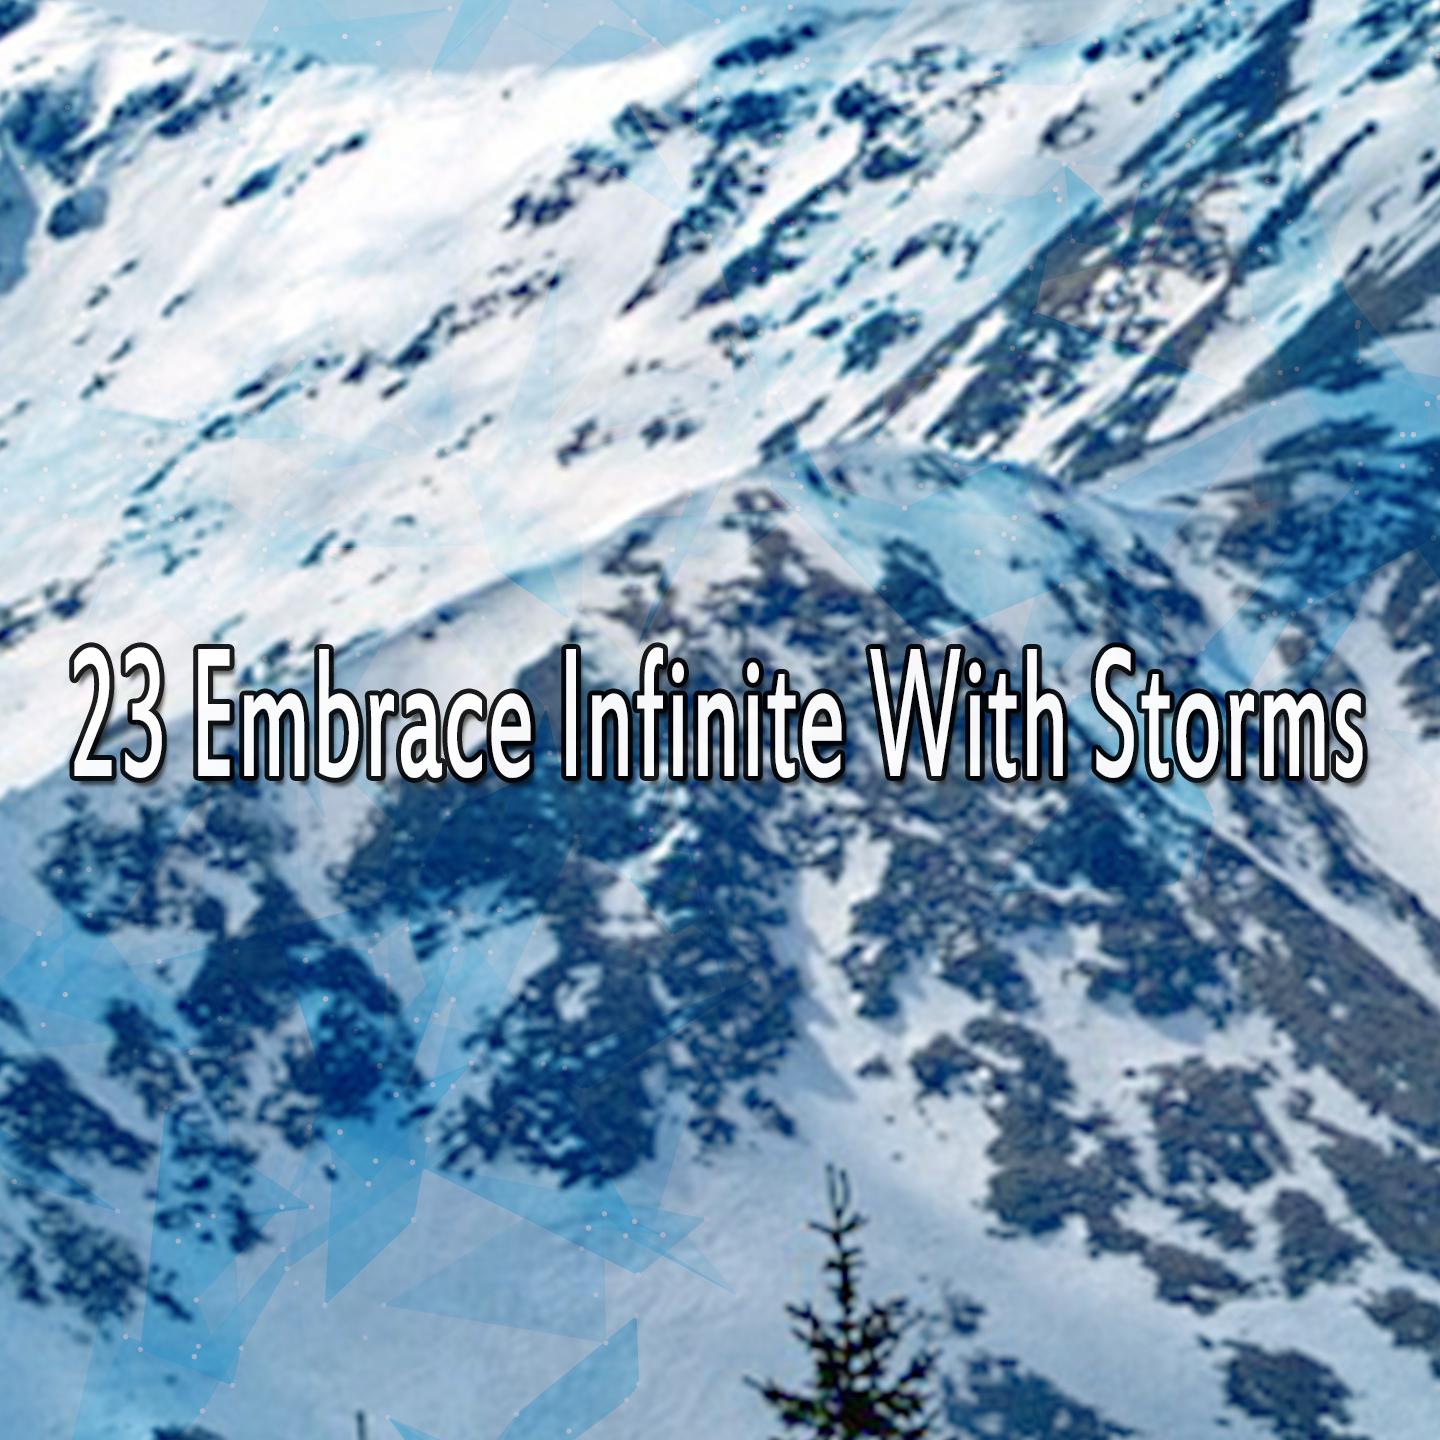 23 Embrace Infinite With Storms